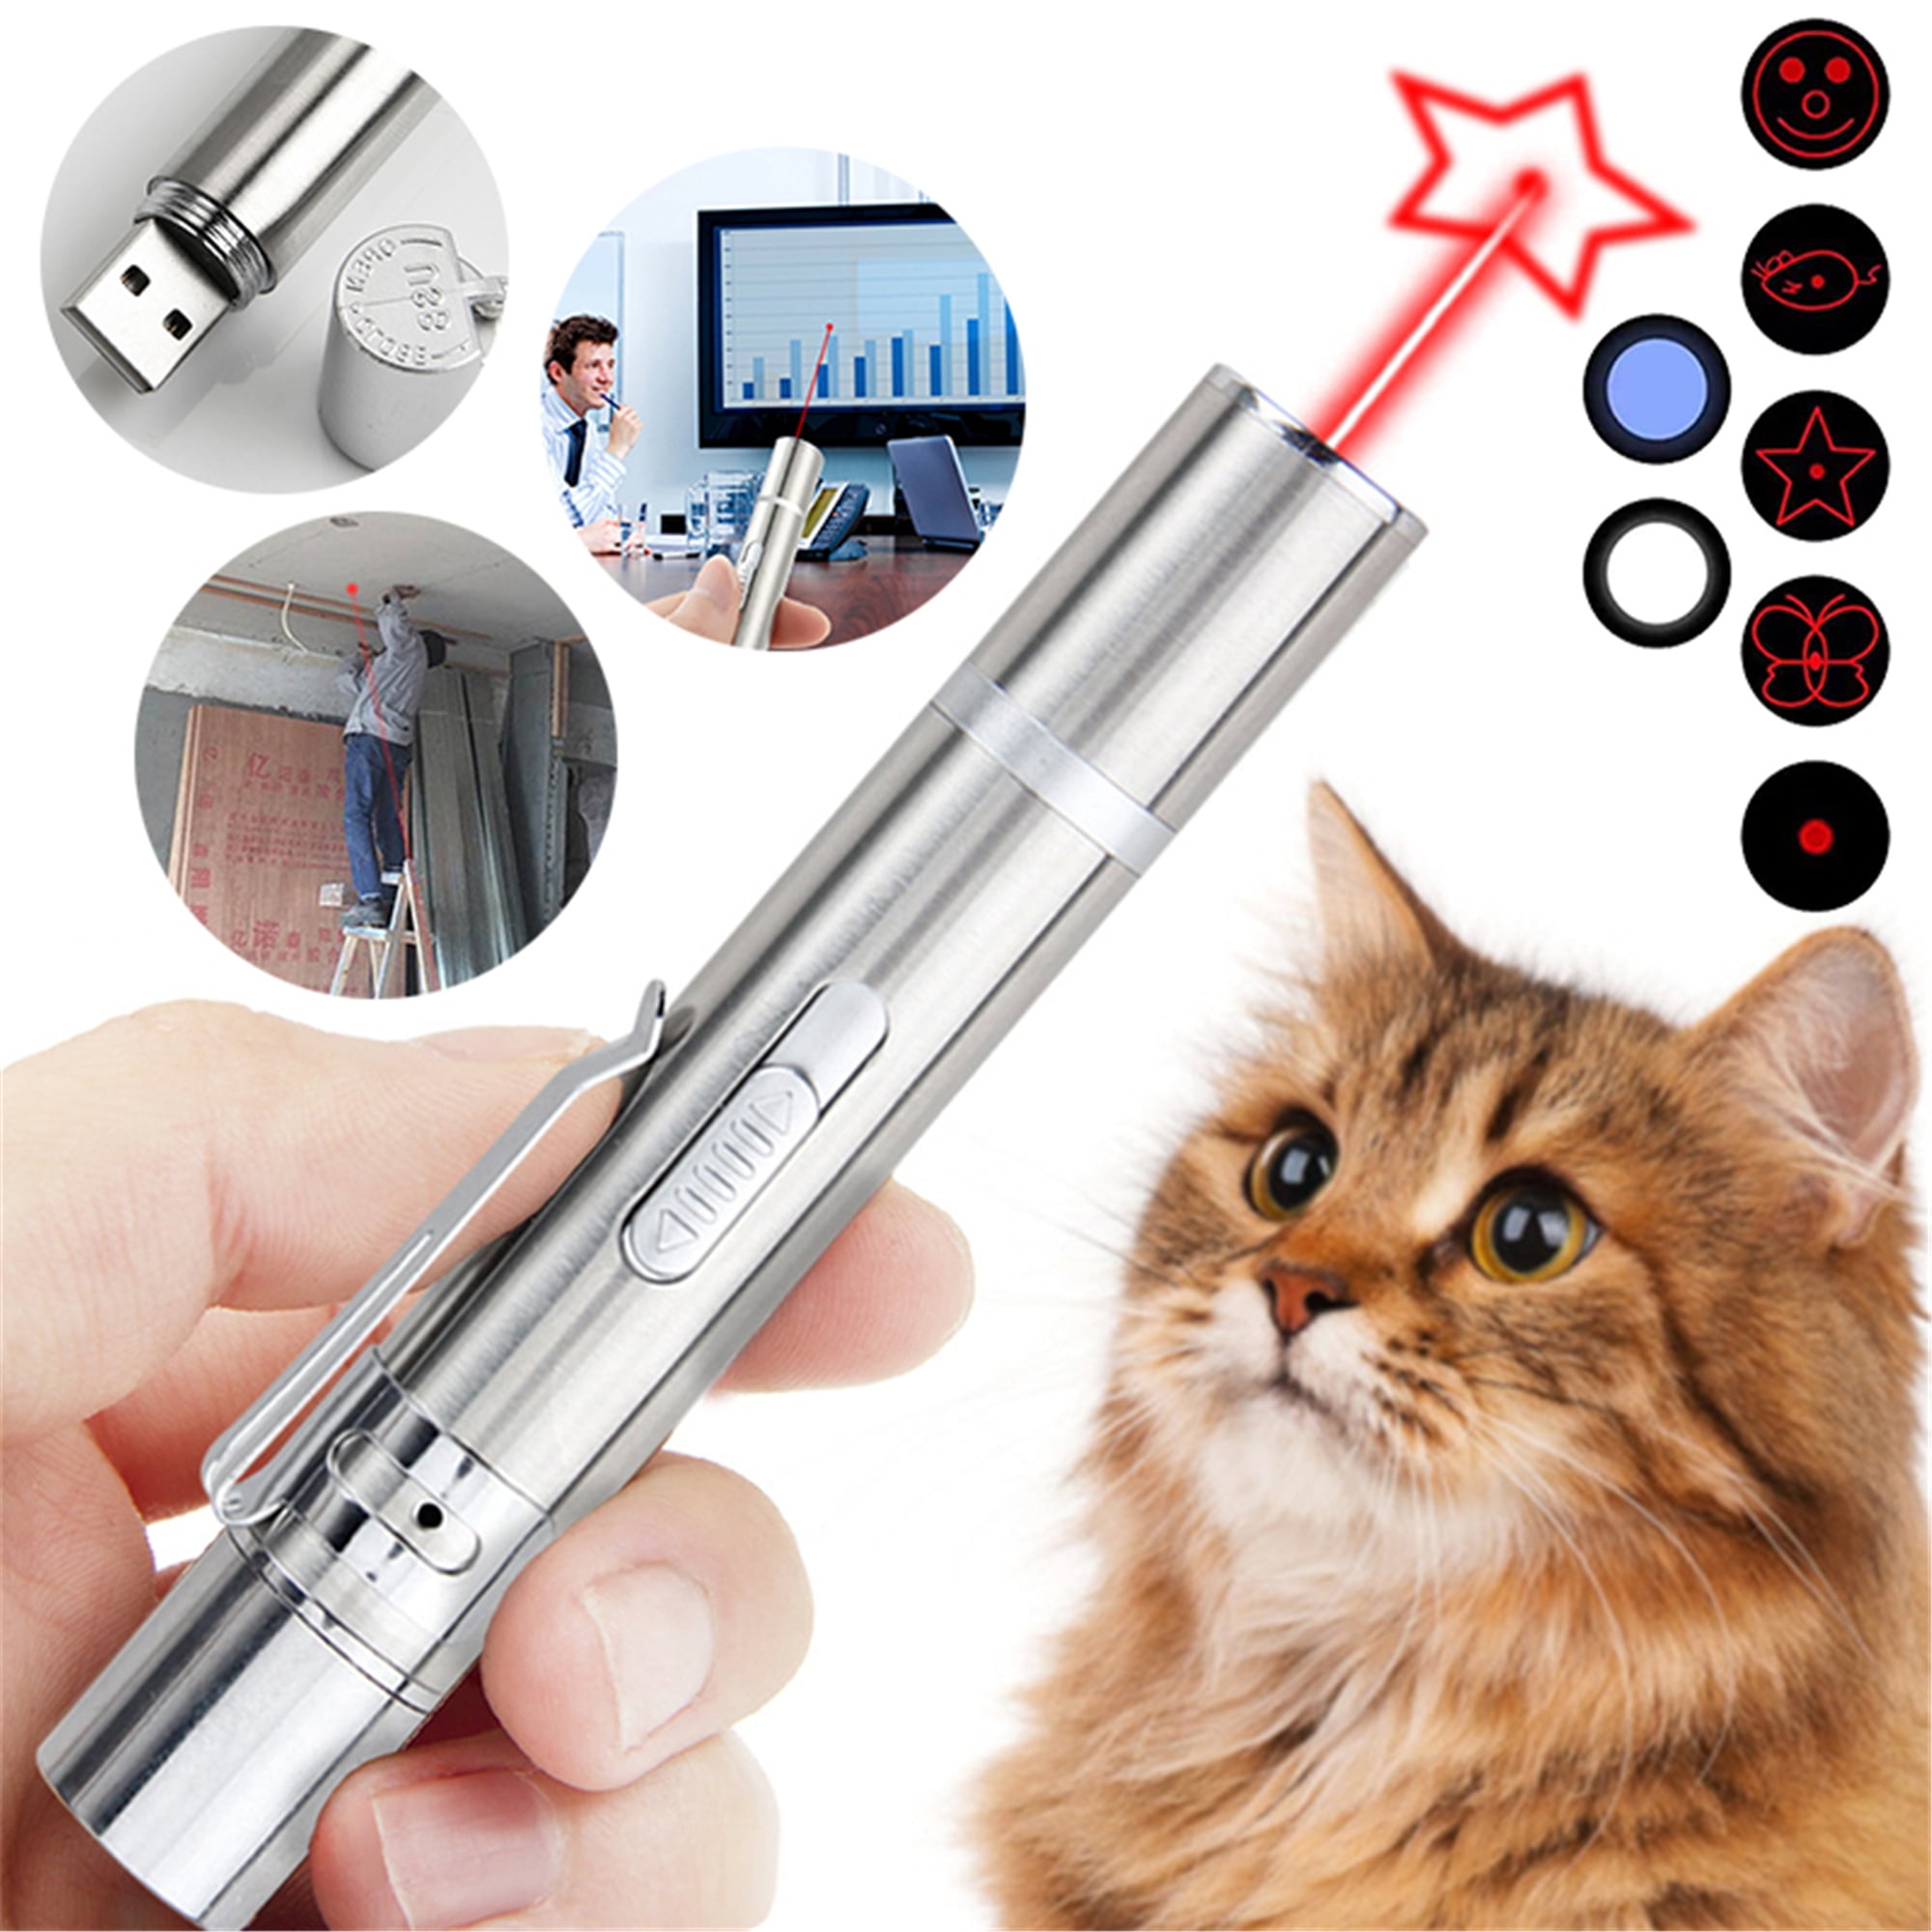 Interactive Cat Toy Pen for Indoor Cats Dogs Pet Dog Chaser Toy for Kitten Puppy Funny Playing Training Catch Exercise Clicker Long Range Tease Cat Stick,Flashlight USB Recharge 